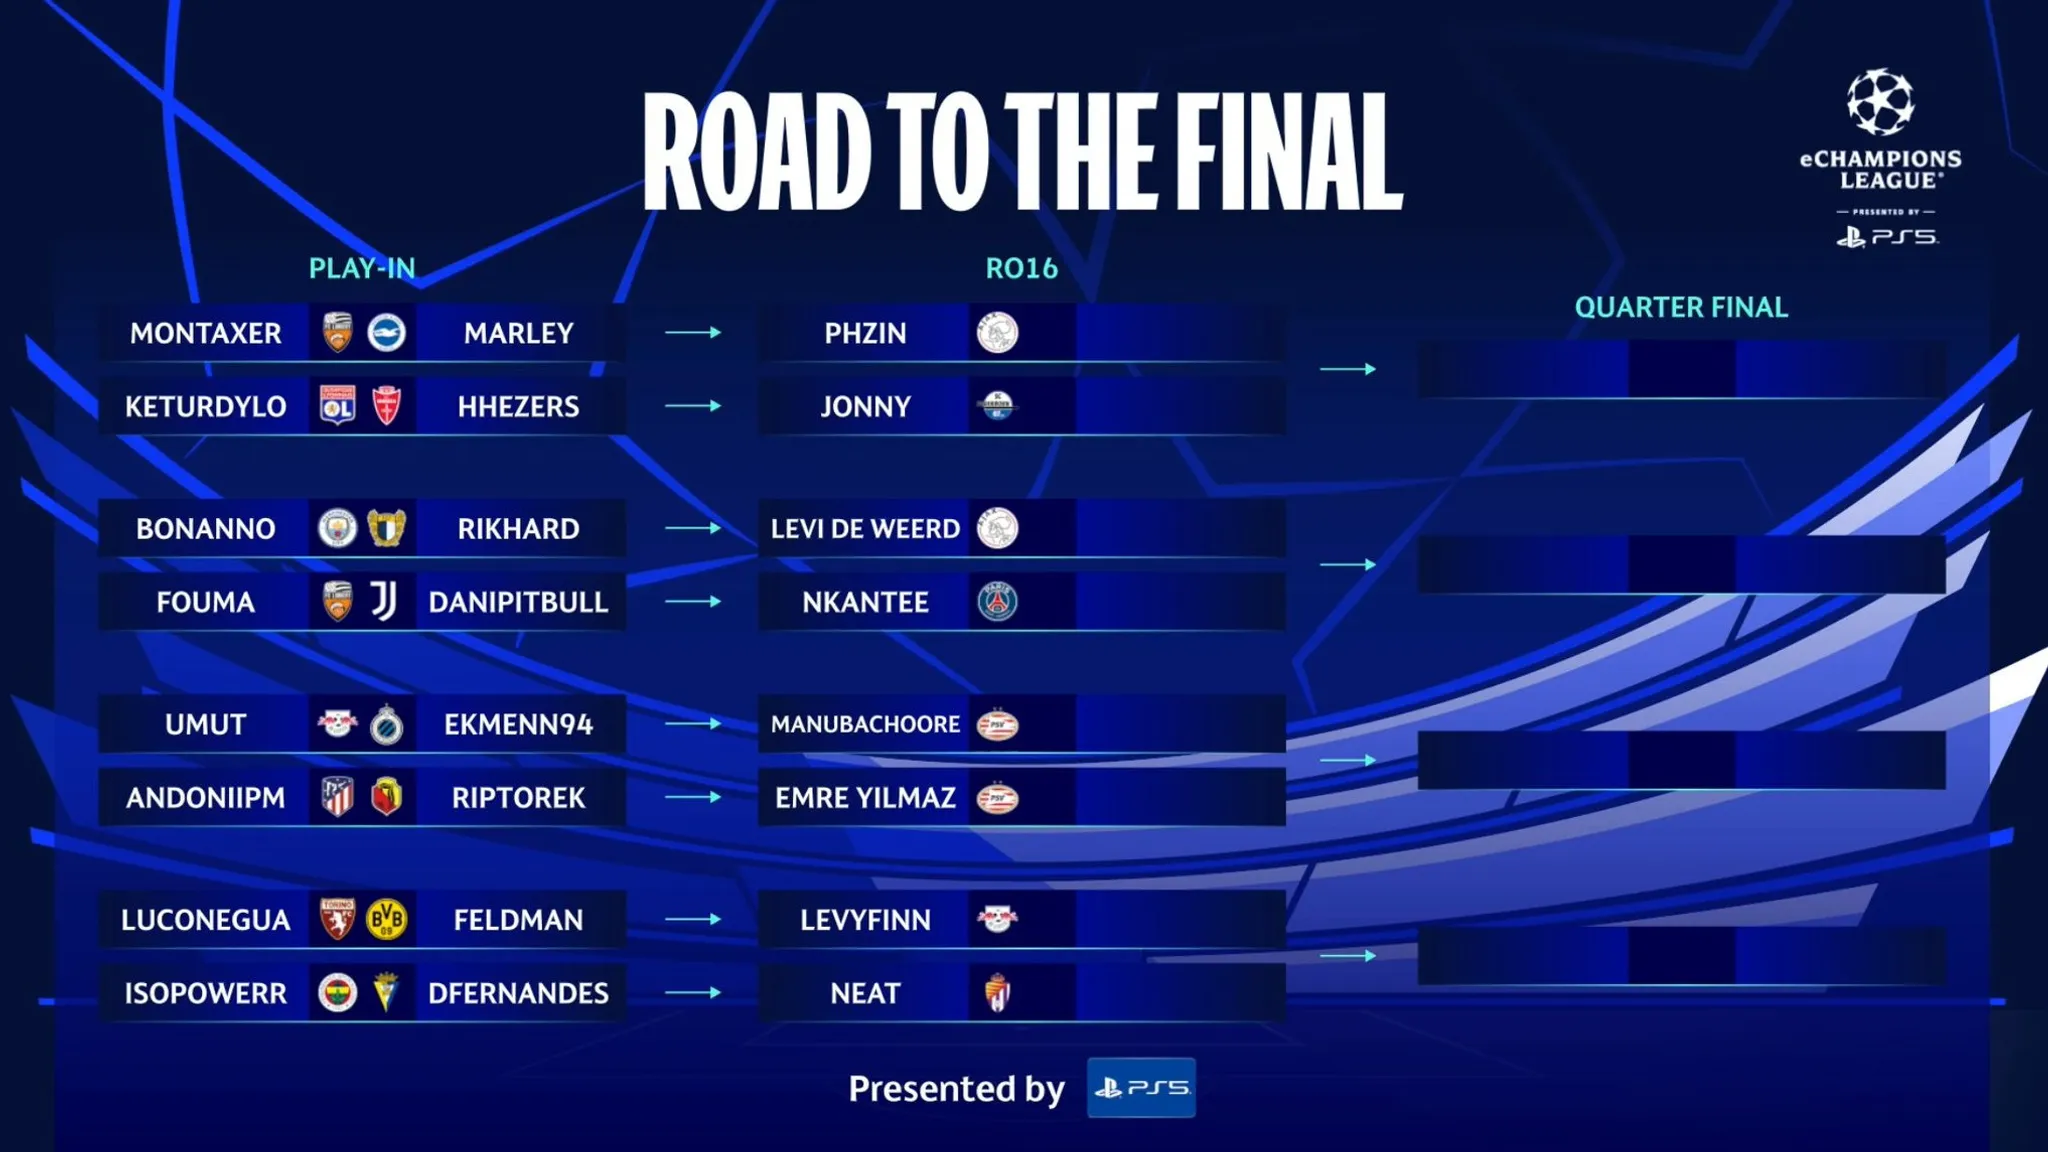 Road to the Final - eChampions League Knockout Stage